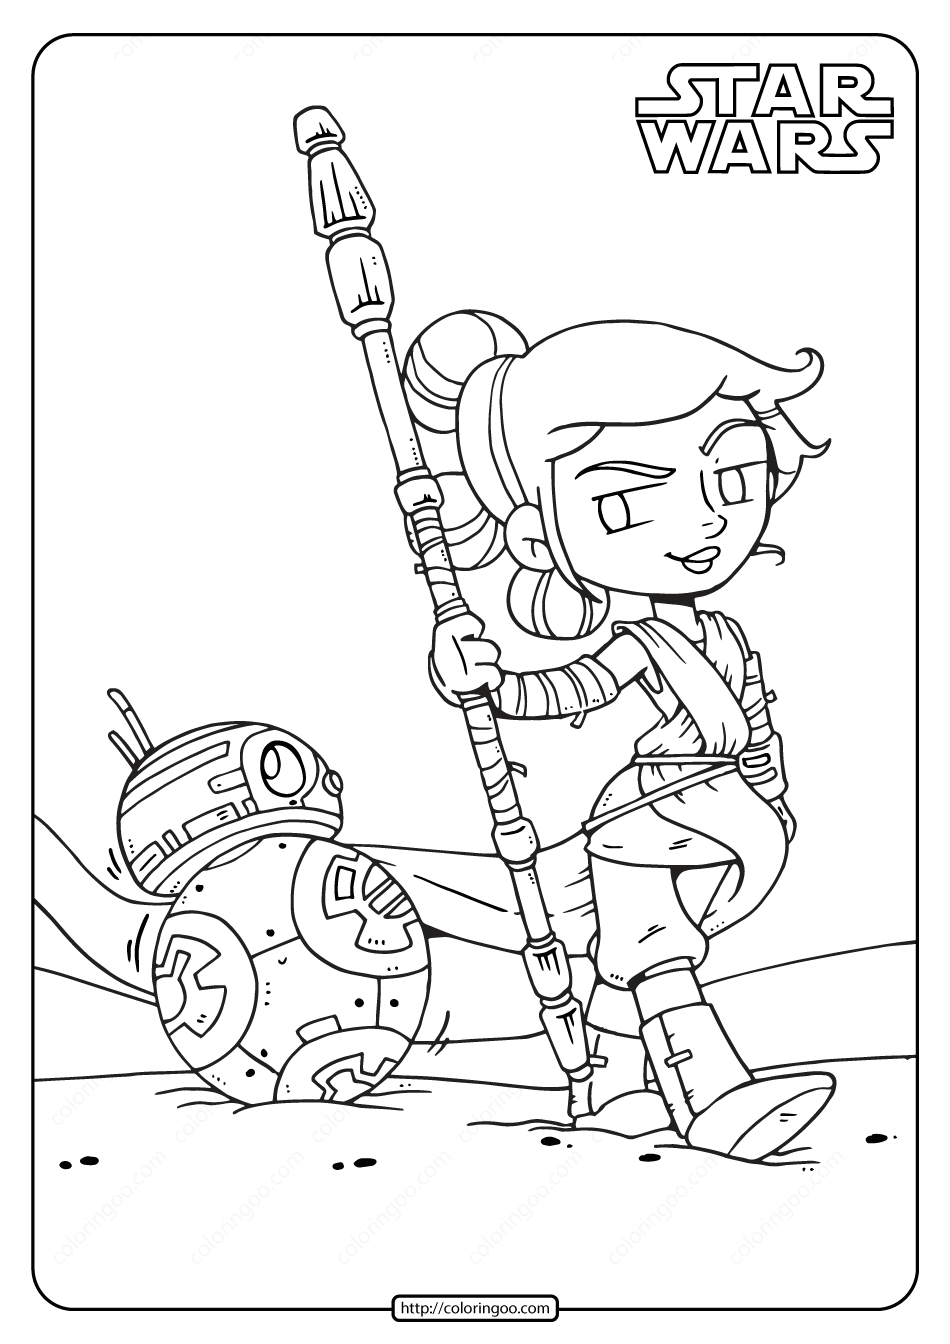 Printable Star Wars Rey and BB 8 Coloring Pages | Star wars coloring sheet, Star  wars cartoon, Star wars colors